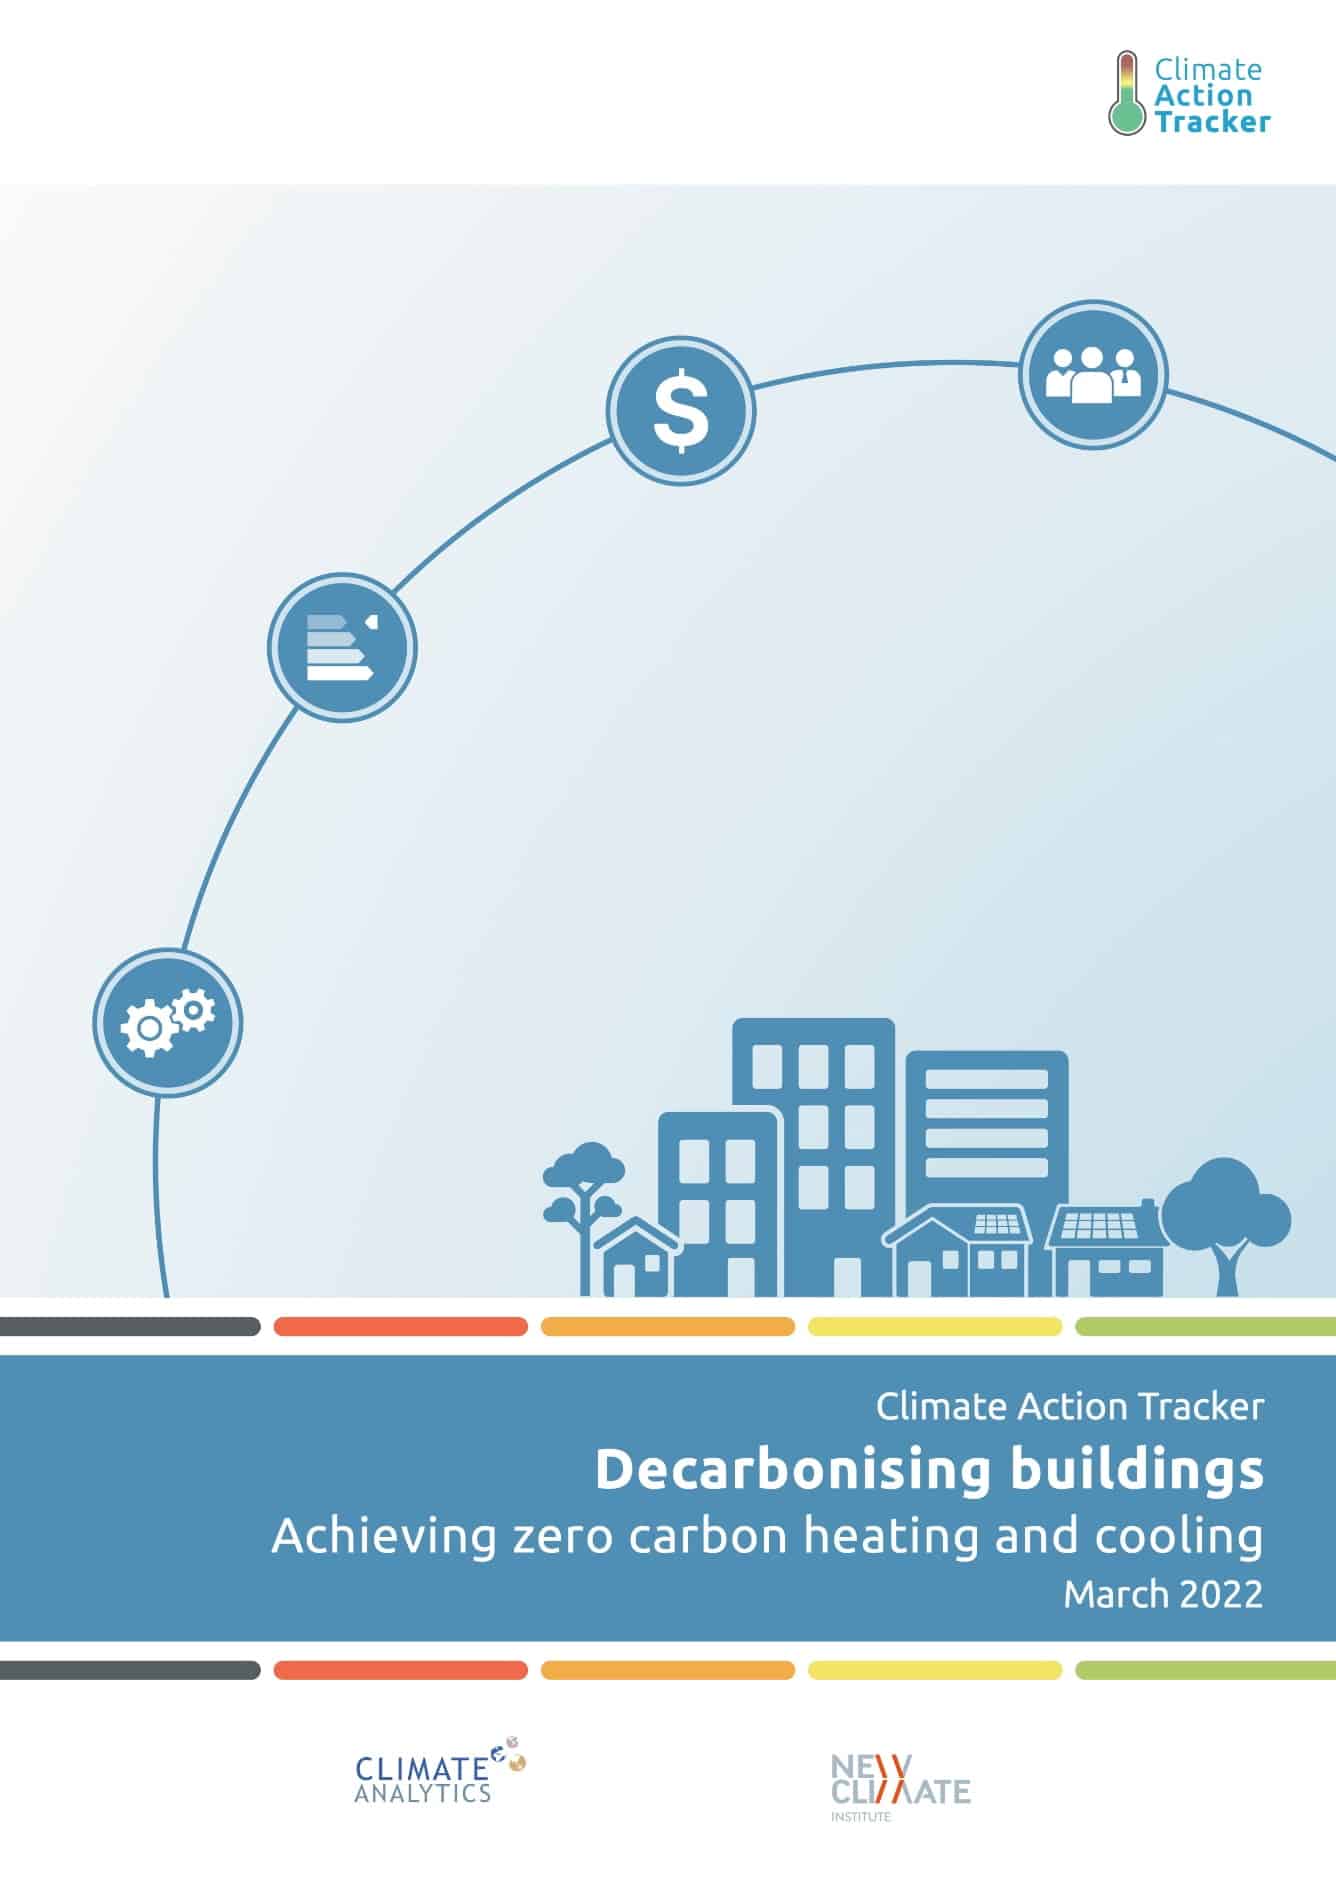 thefuture, CAT, Reports, Decarbonising Buildings